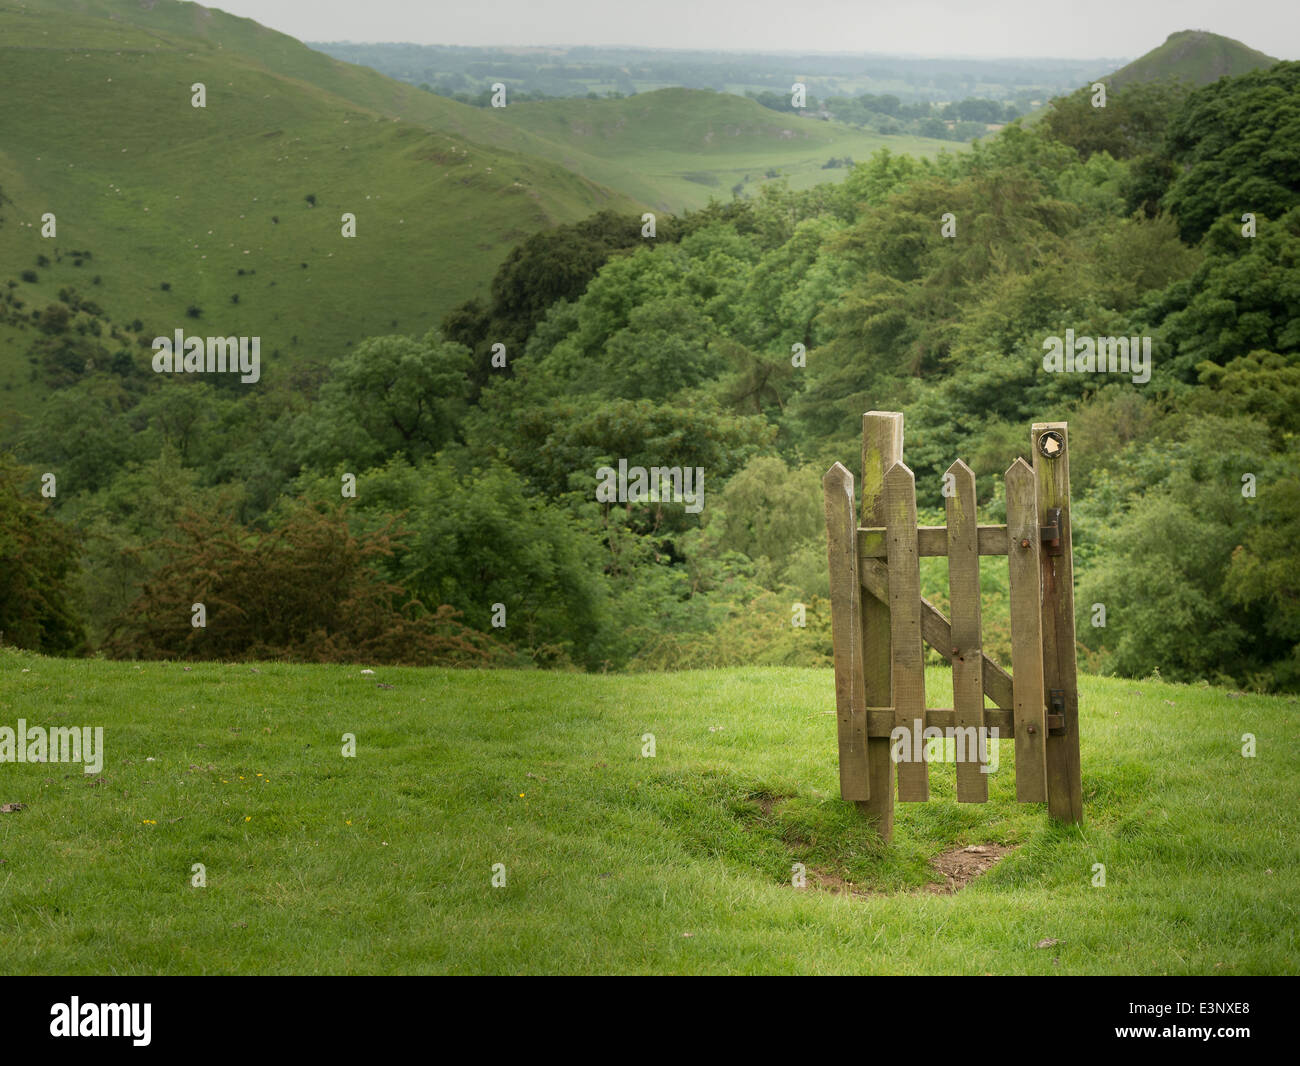 Gateway without a fence at the top of hill is a puzzling, hilarious sight. Stock Photo